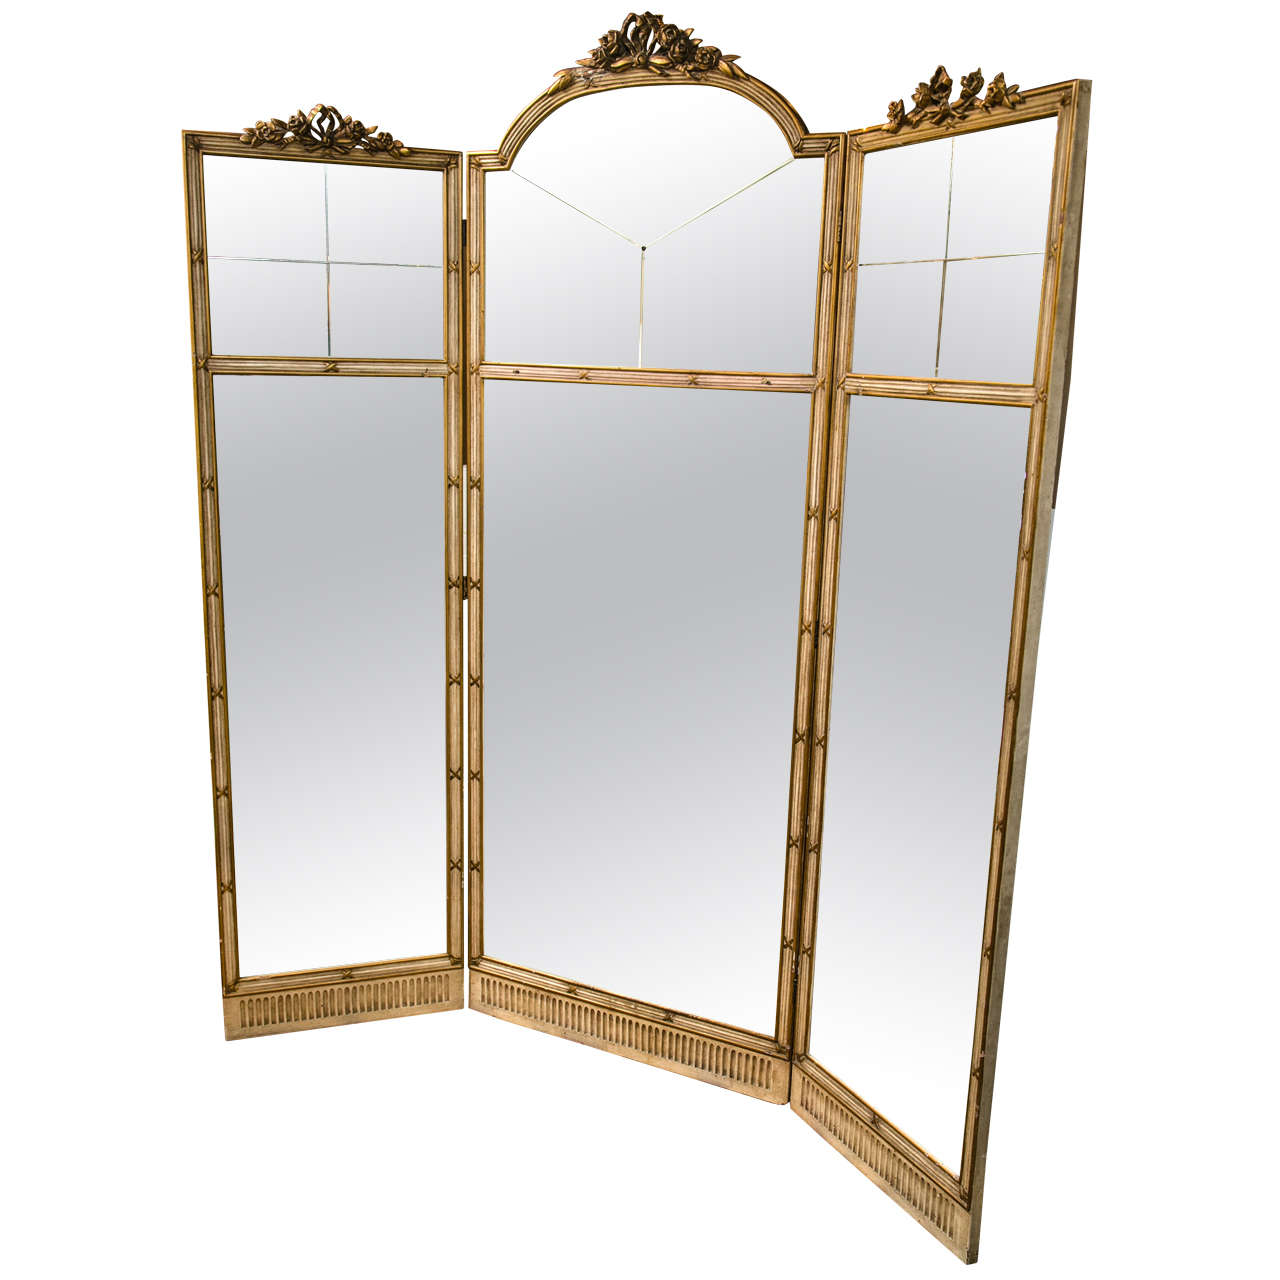 Three-Panel Hollywood Regency Room Divider or Screen in the Manner of Jansen